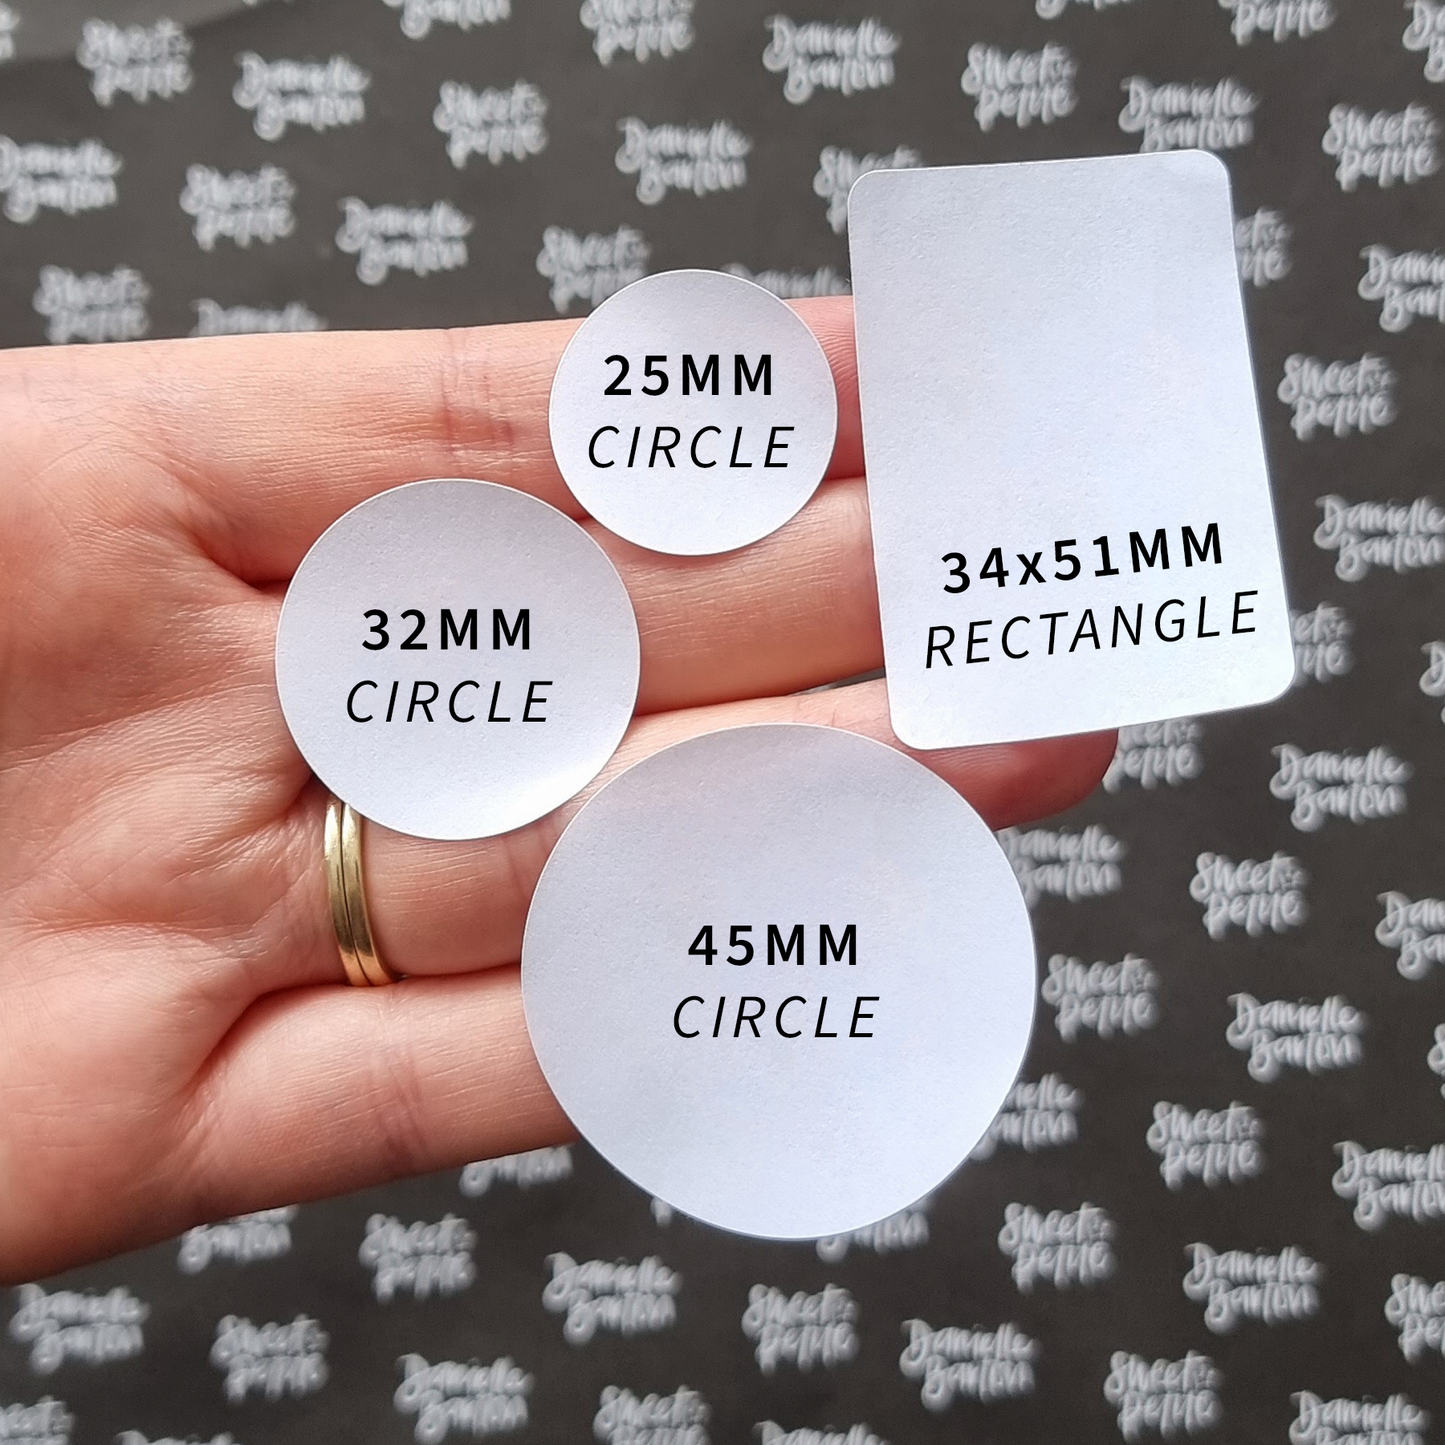 Size Comparison of matte logo stickers | Custom stickers by Sweet Petite